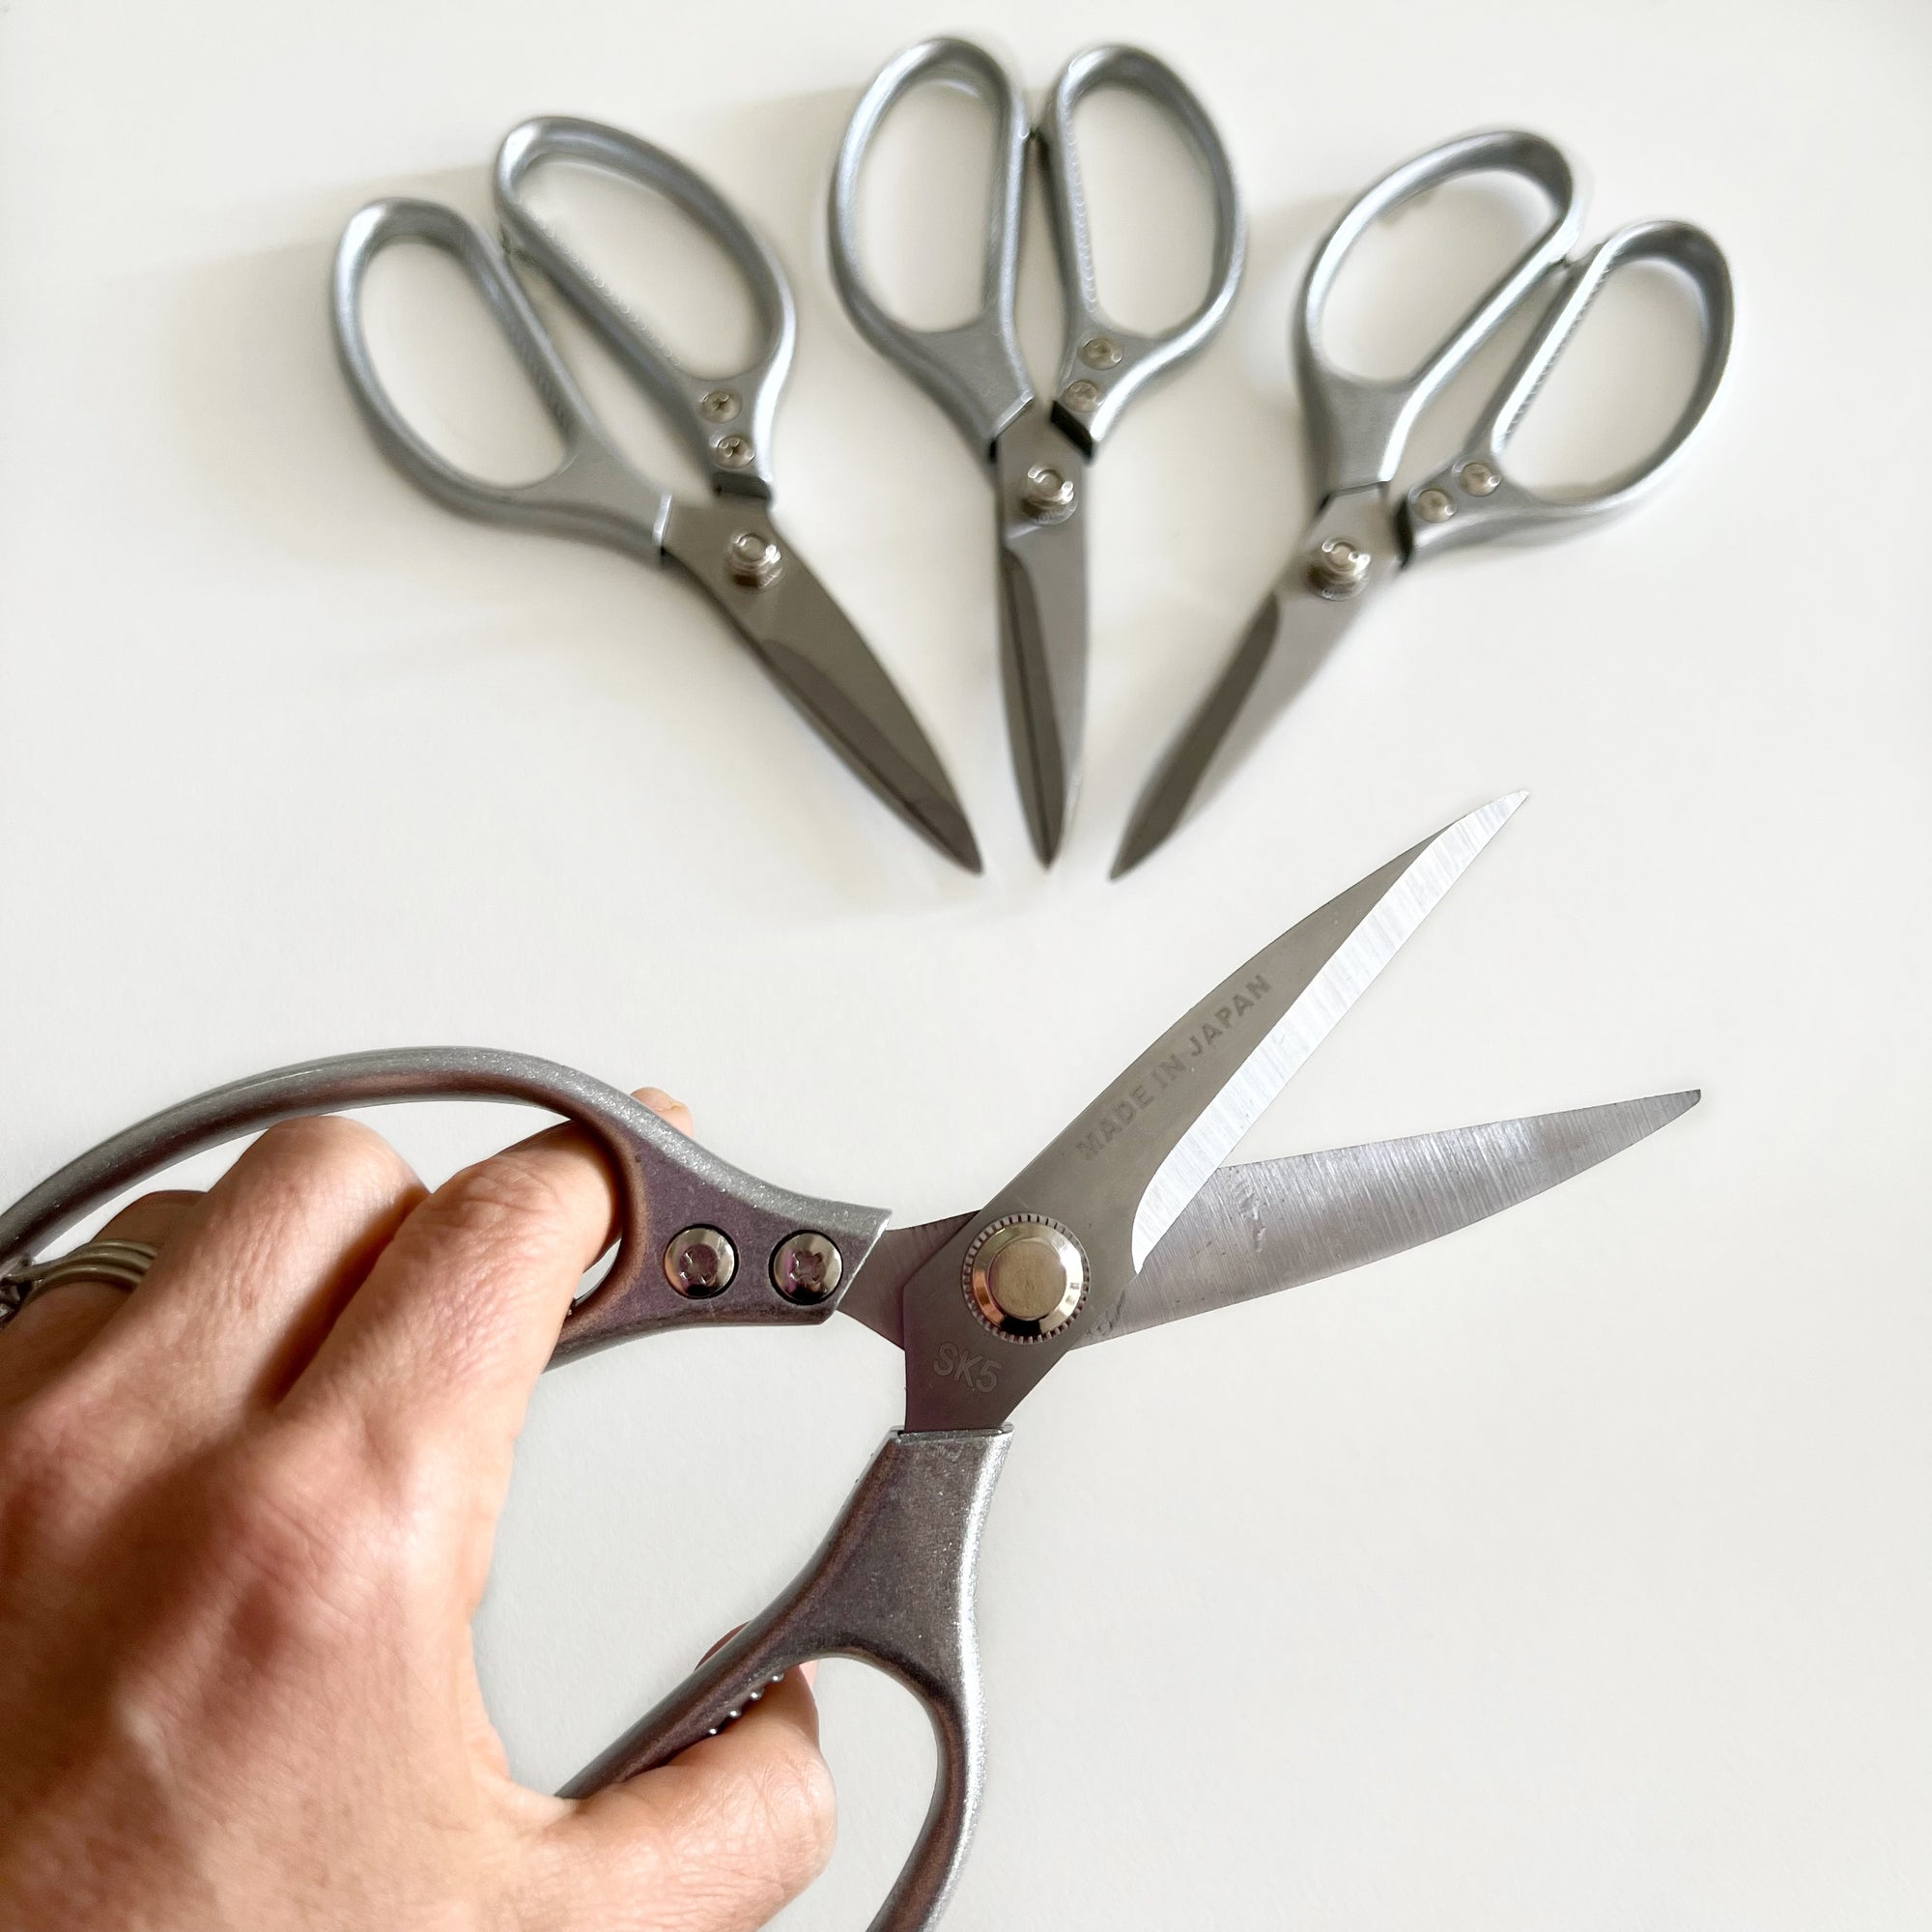 metal craft scissors in group photo on white background